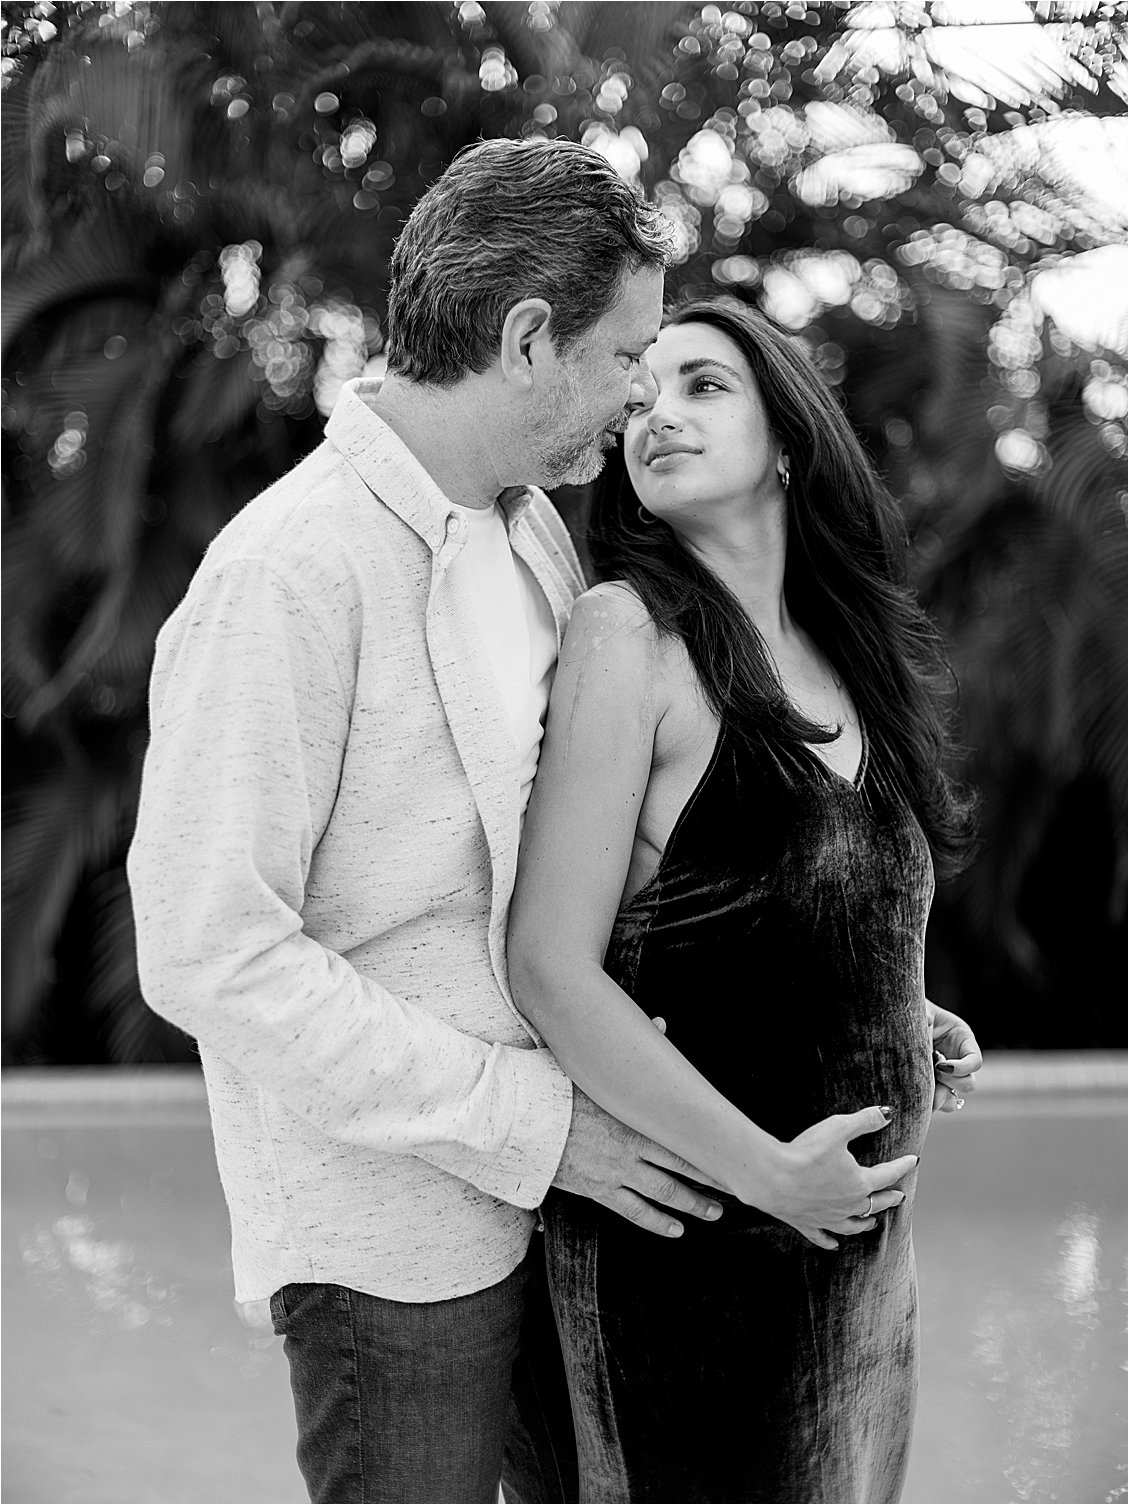 Poolside maternity session in Miami with film photographer Renee Hollingshead